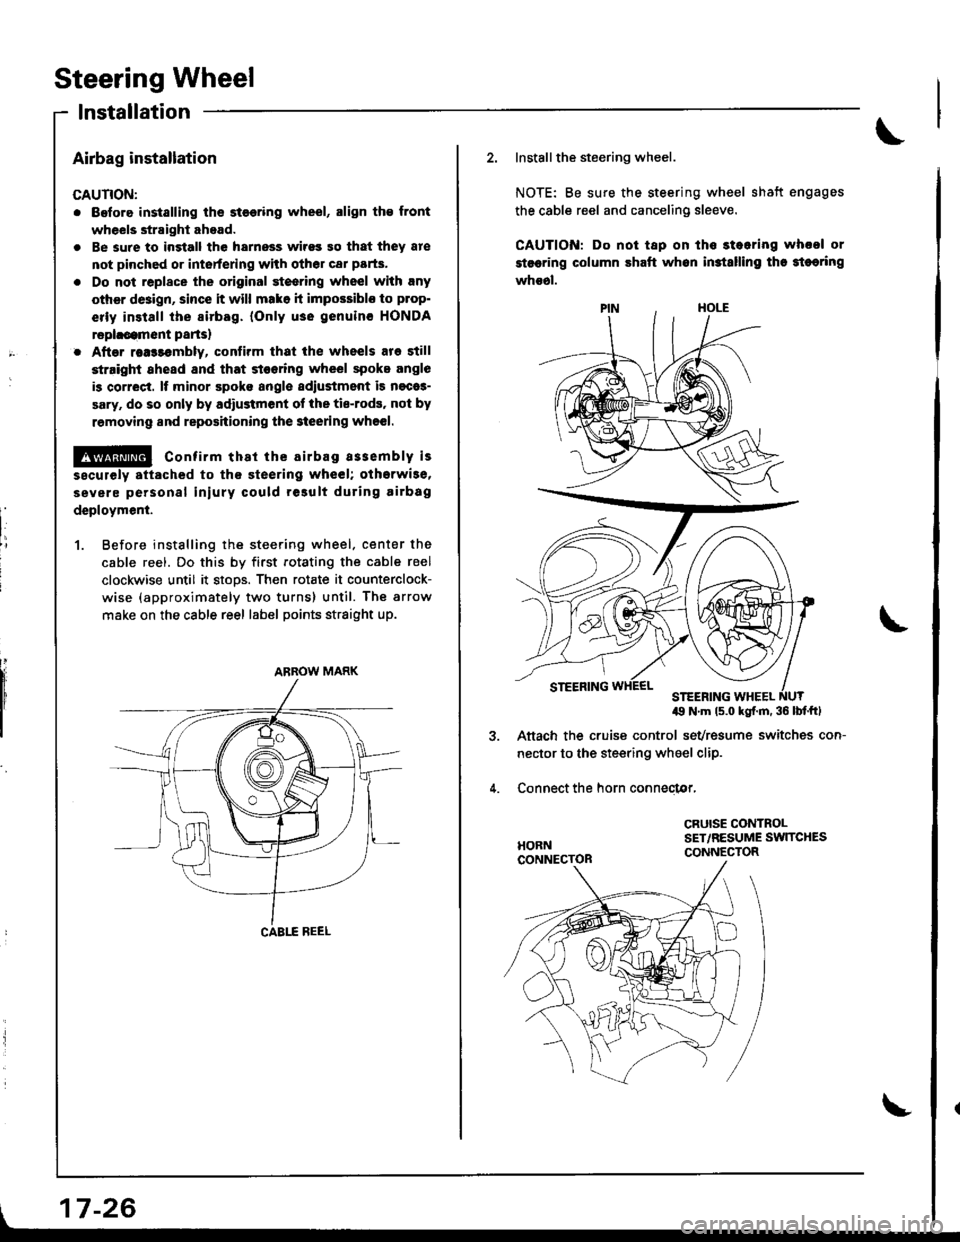 ACURA INTEGRA 1998  Service Repair Manual Steering Wheel
lnstallation
Airbag installation
CAUTION:
. Before installing ths st€€ring wheel, align th€ front
wheels straight ahead.
. Be sure to ingtall the harnoss wirss 90 that they 8re
no